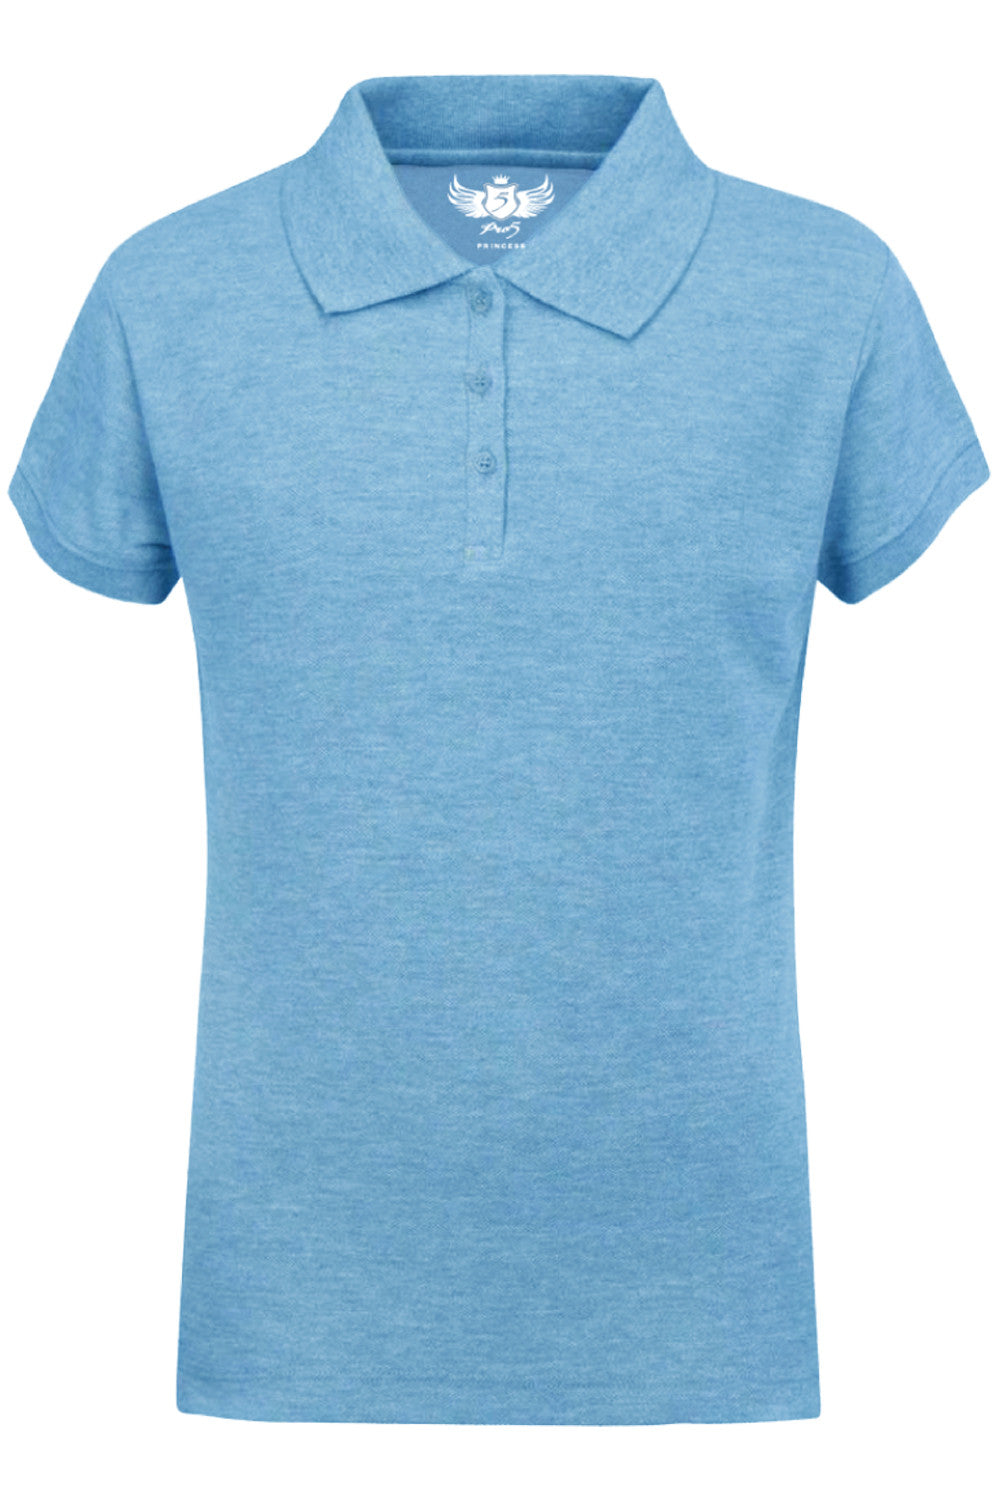 Girl's Sky Blue Polo Shirt: A timeless classic for versatile style. Comfortable fit with a collared design. Available in various sizes and vibrant colors. Made from quality materials for lasting durability and easy care.